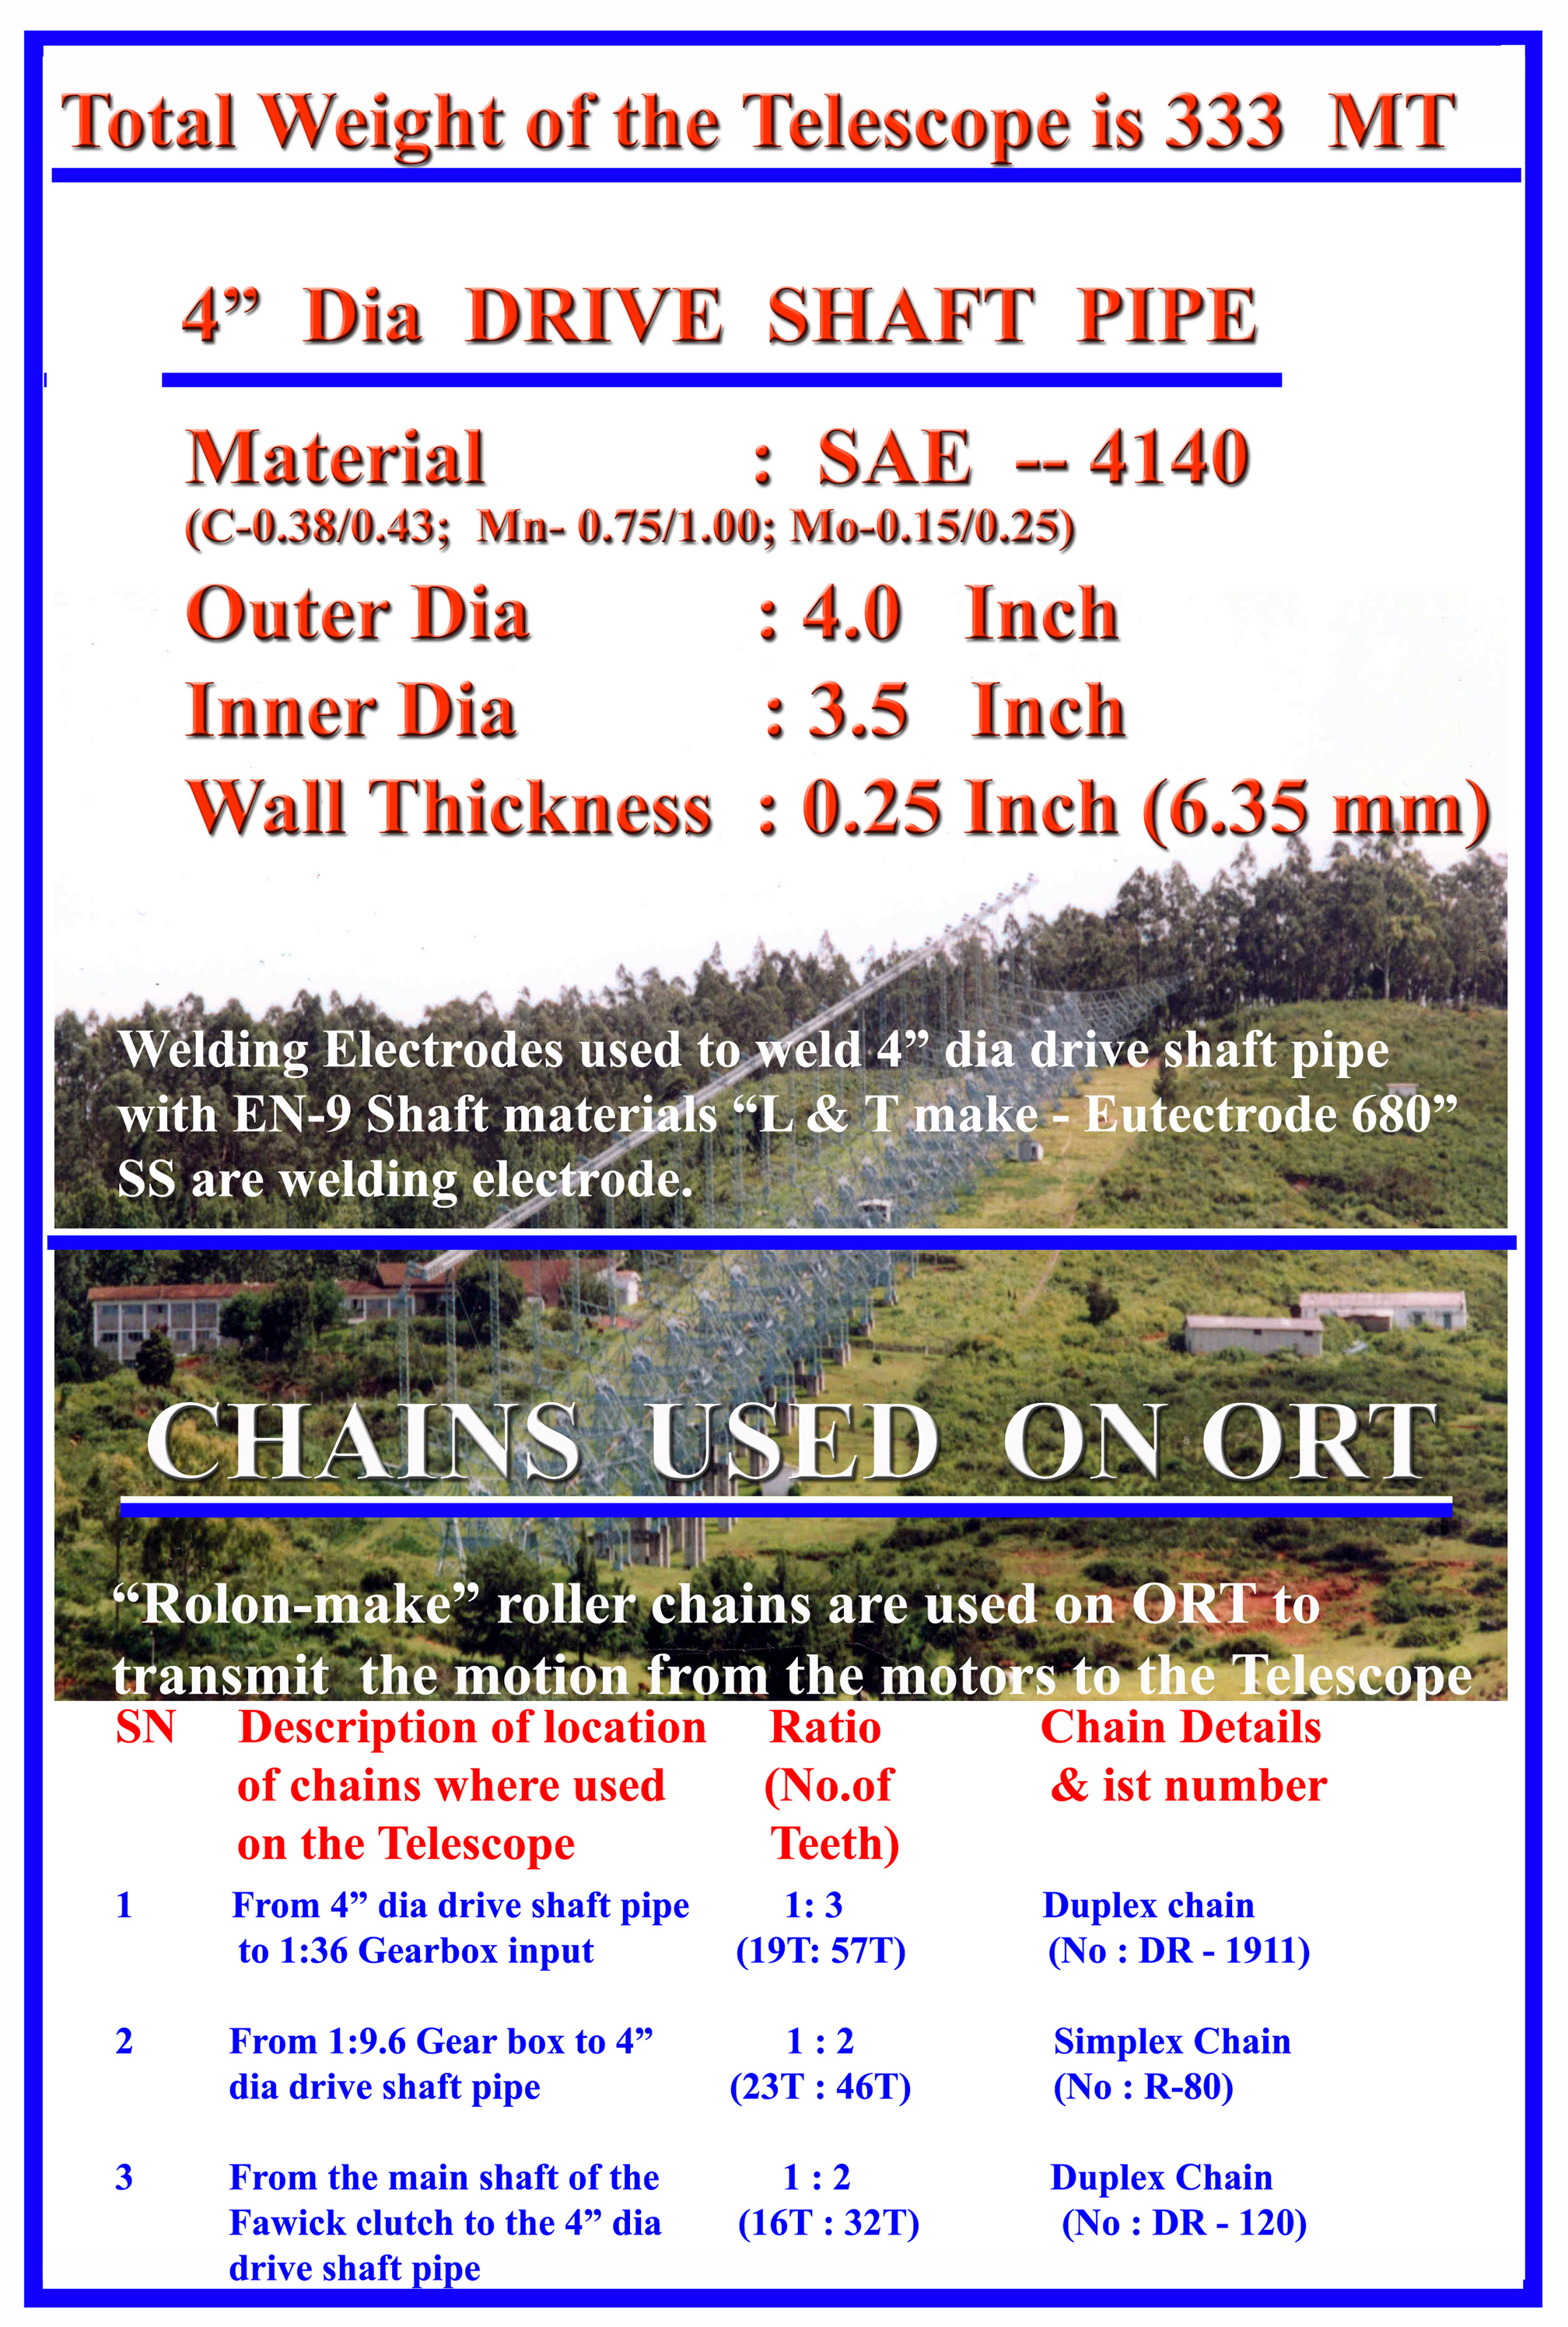 Chains used on ORT